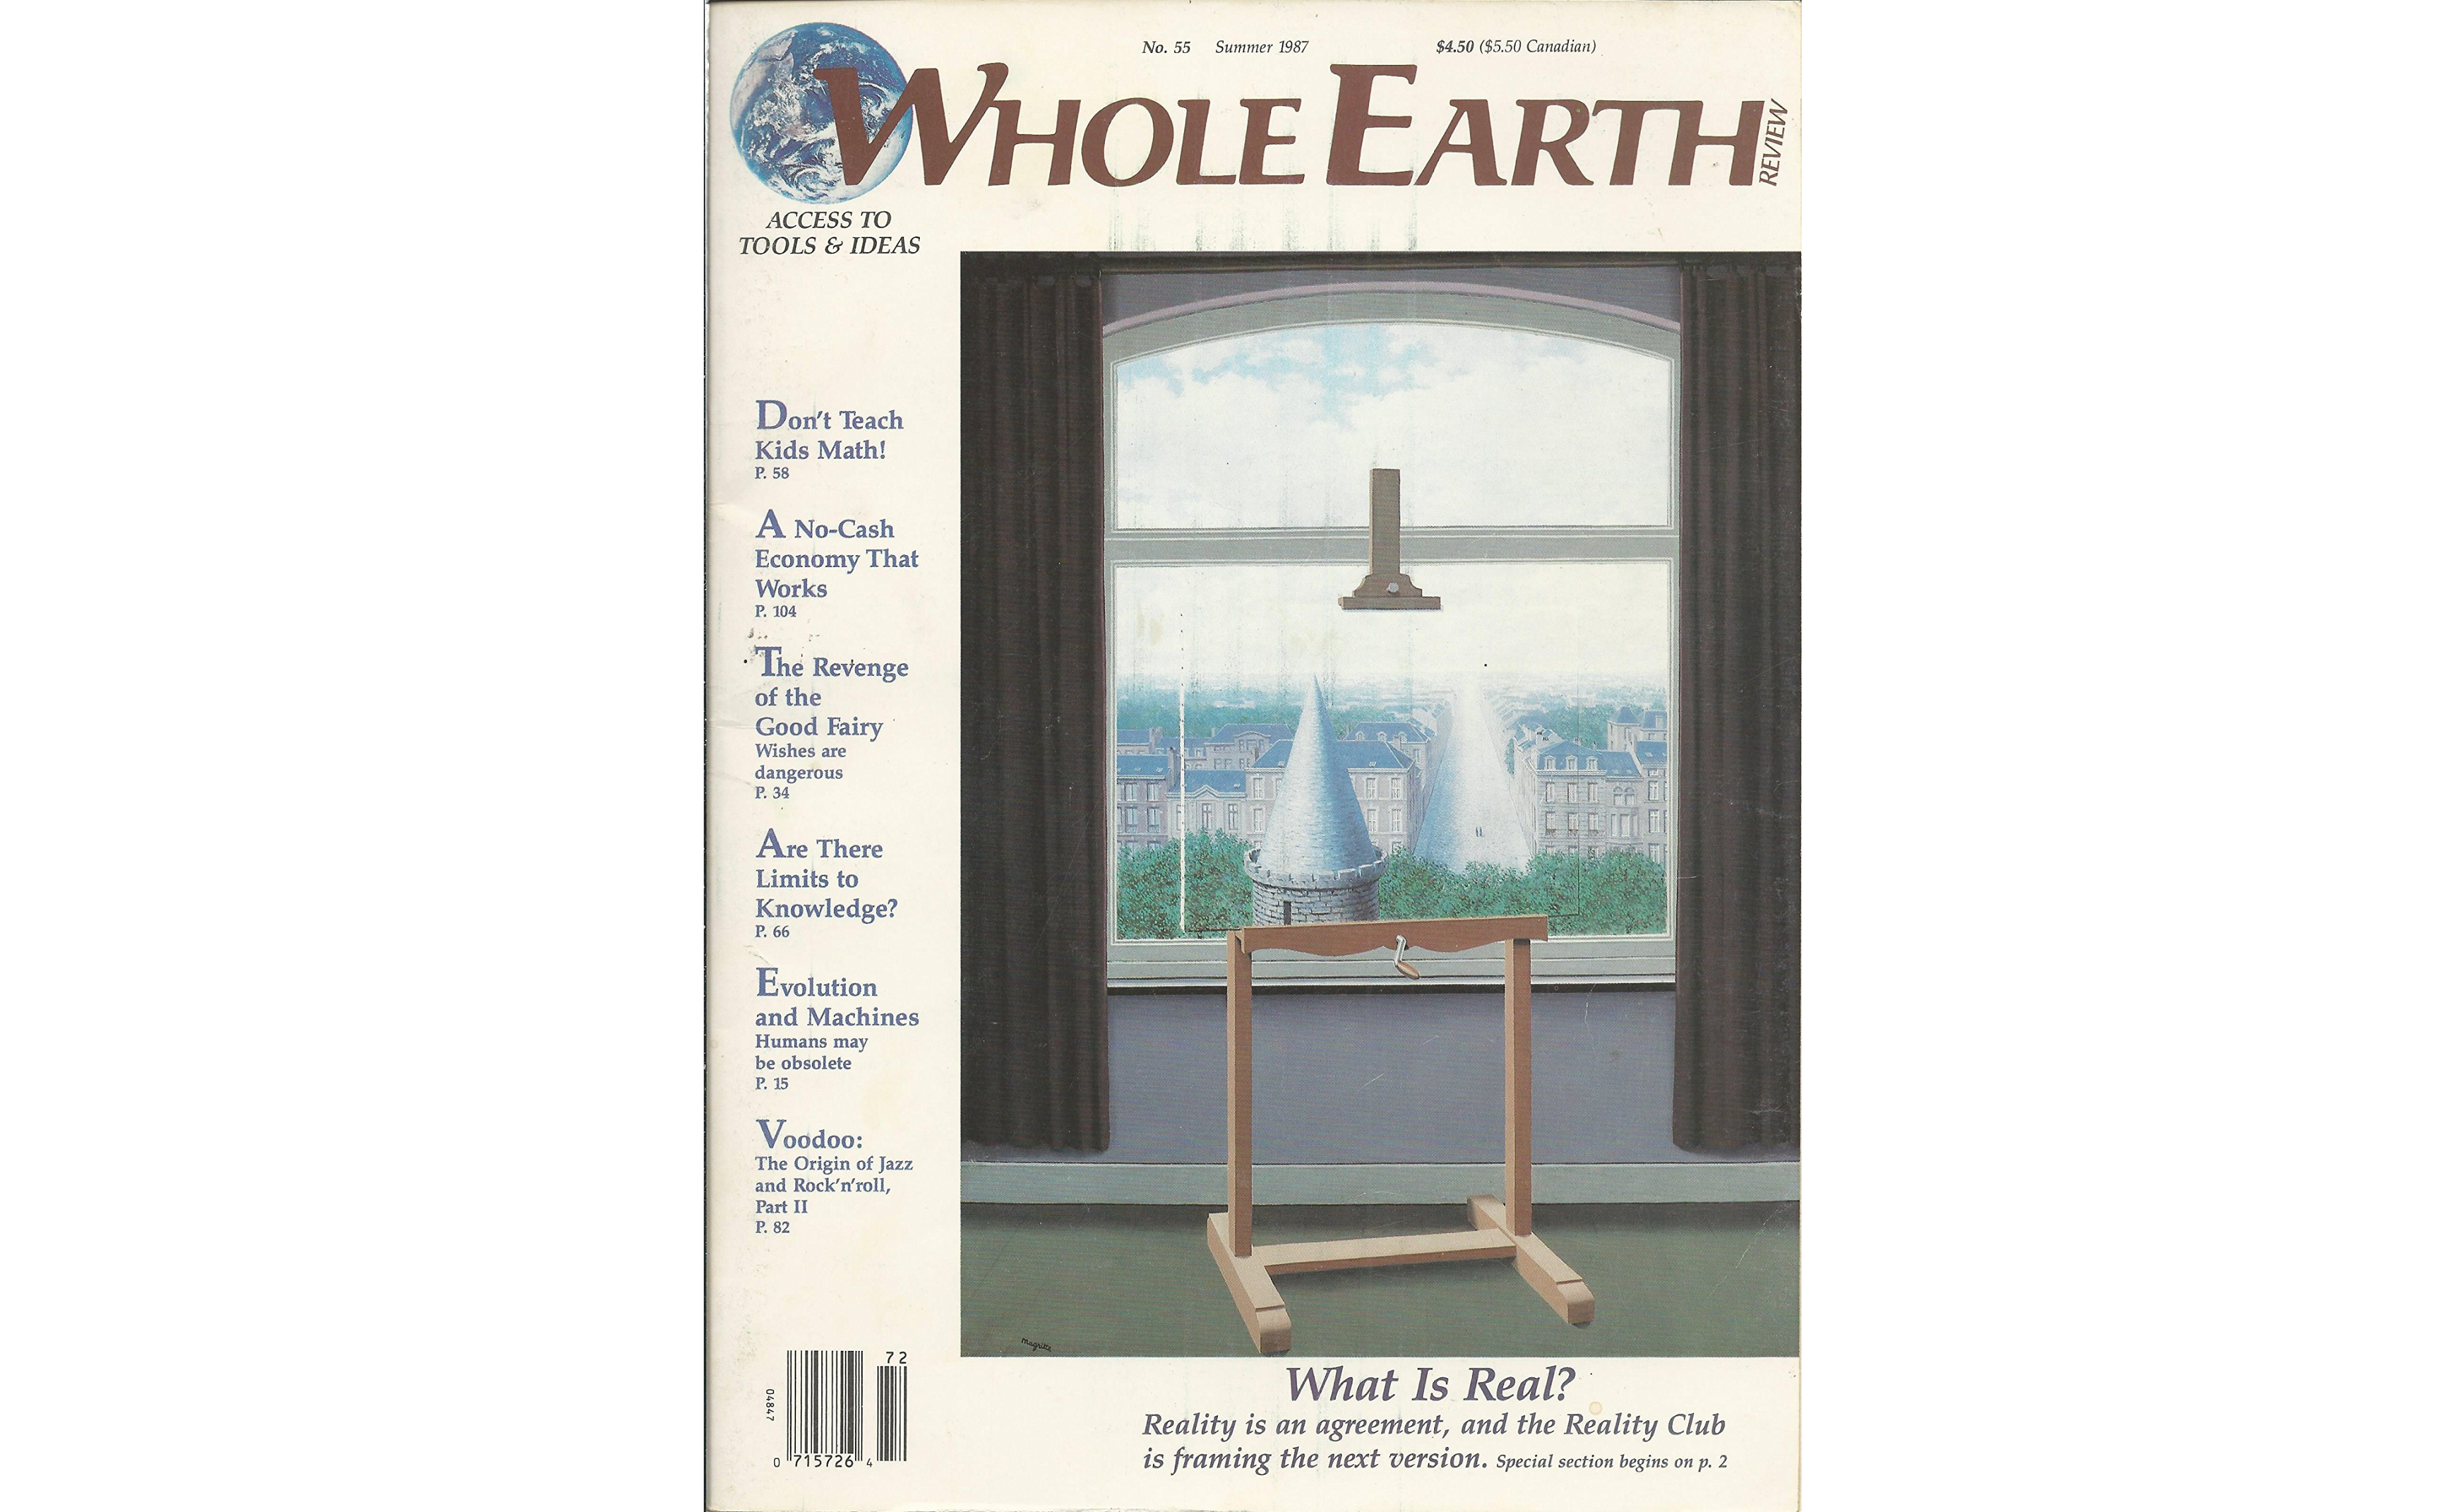 A 1987 cover of the Whole Earth Review. Image from Amazon.